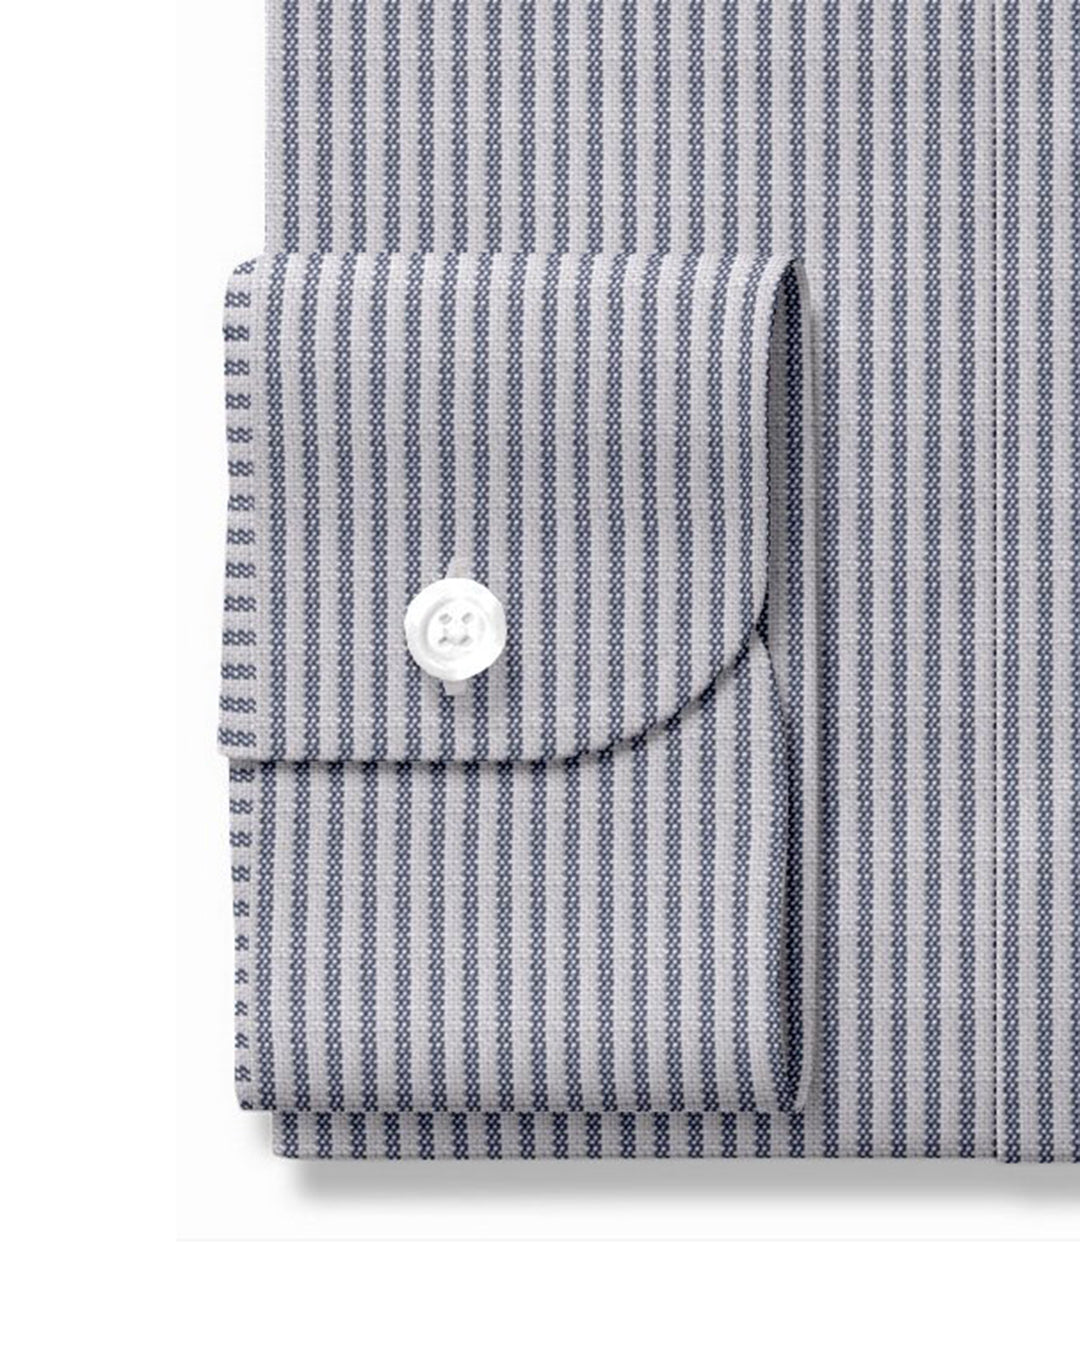 Cuff of the custom linen shirt for men in blue and white stripes by Luxire Clothing